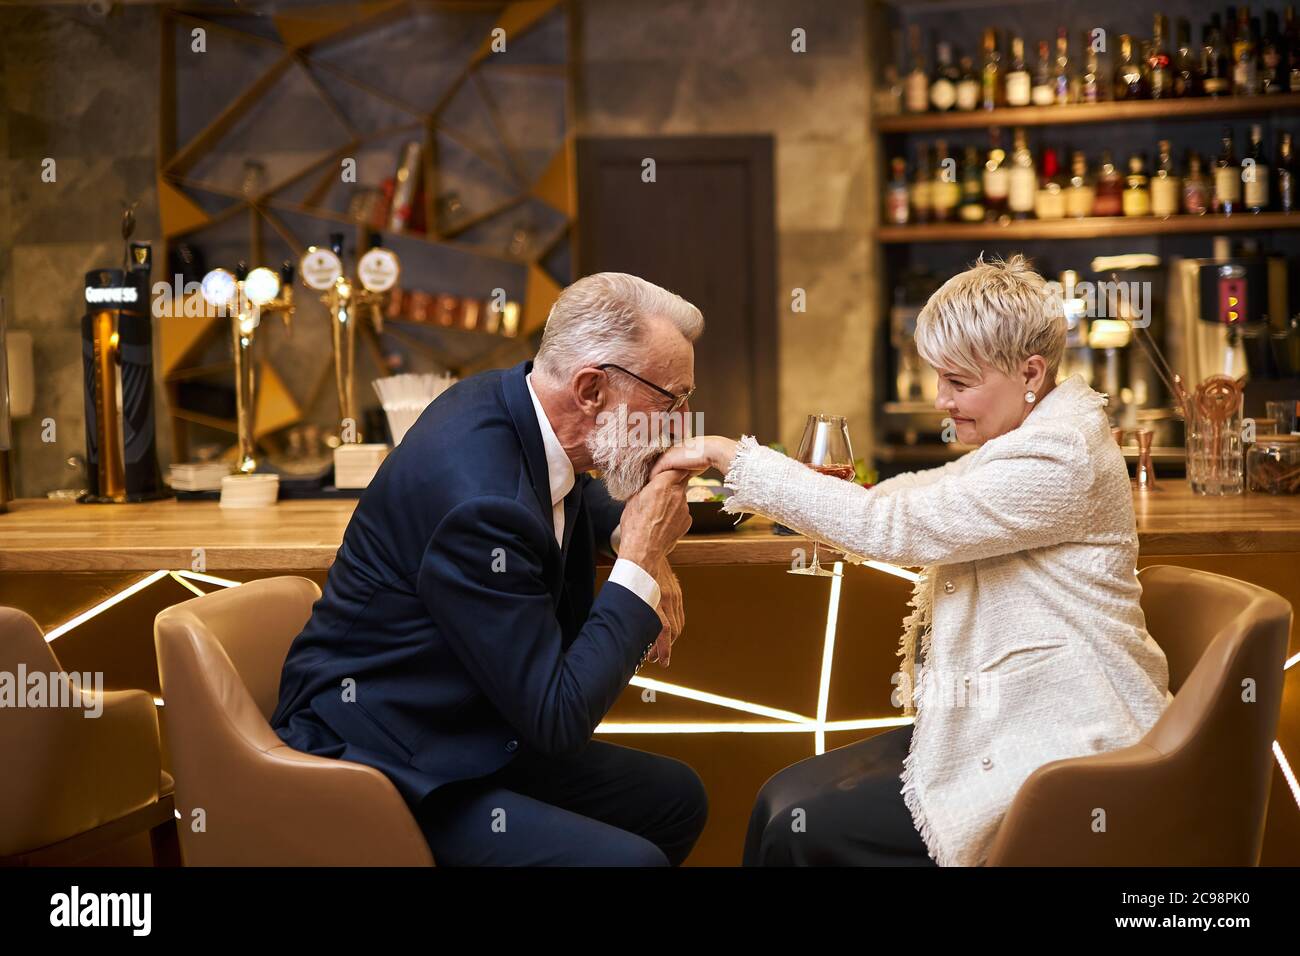 Handsome man in beautiful tuxedo and woman in white blazer sit in expensive beautiful restaurant. Male kissing hand and declare his love. Romantic ima Stock Photo